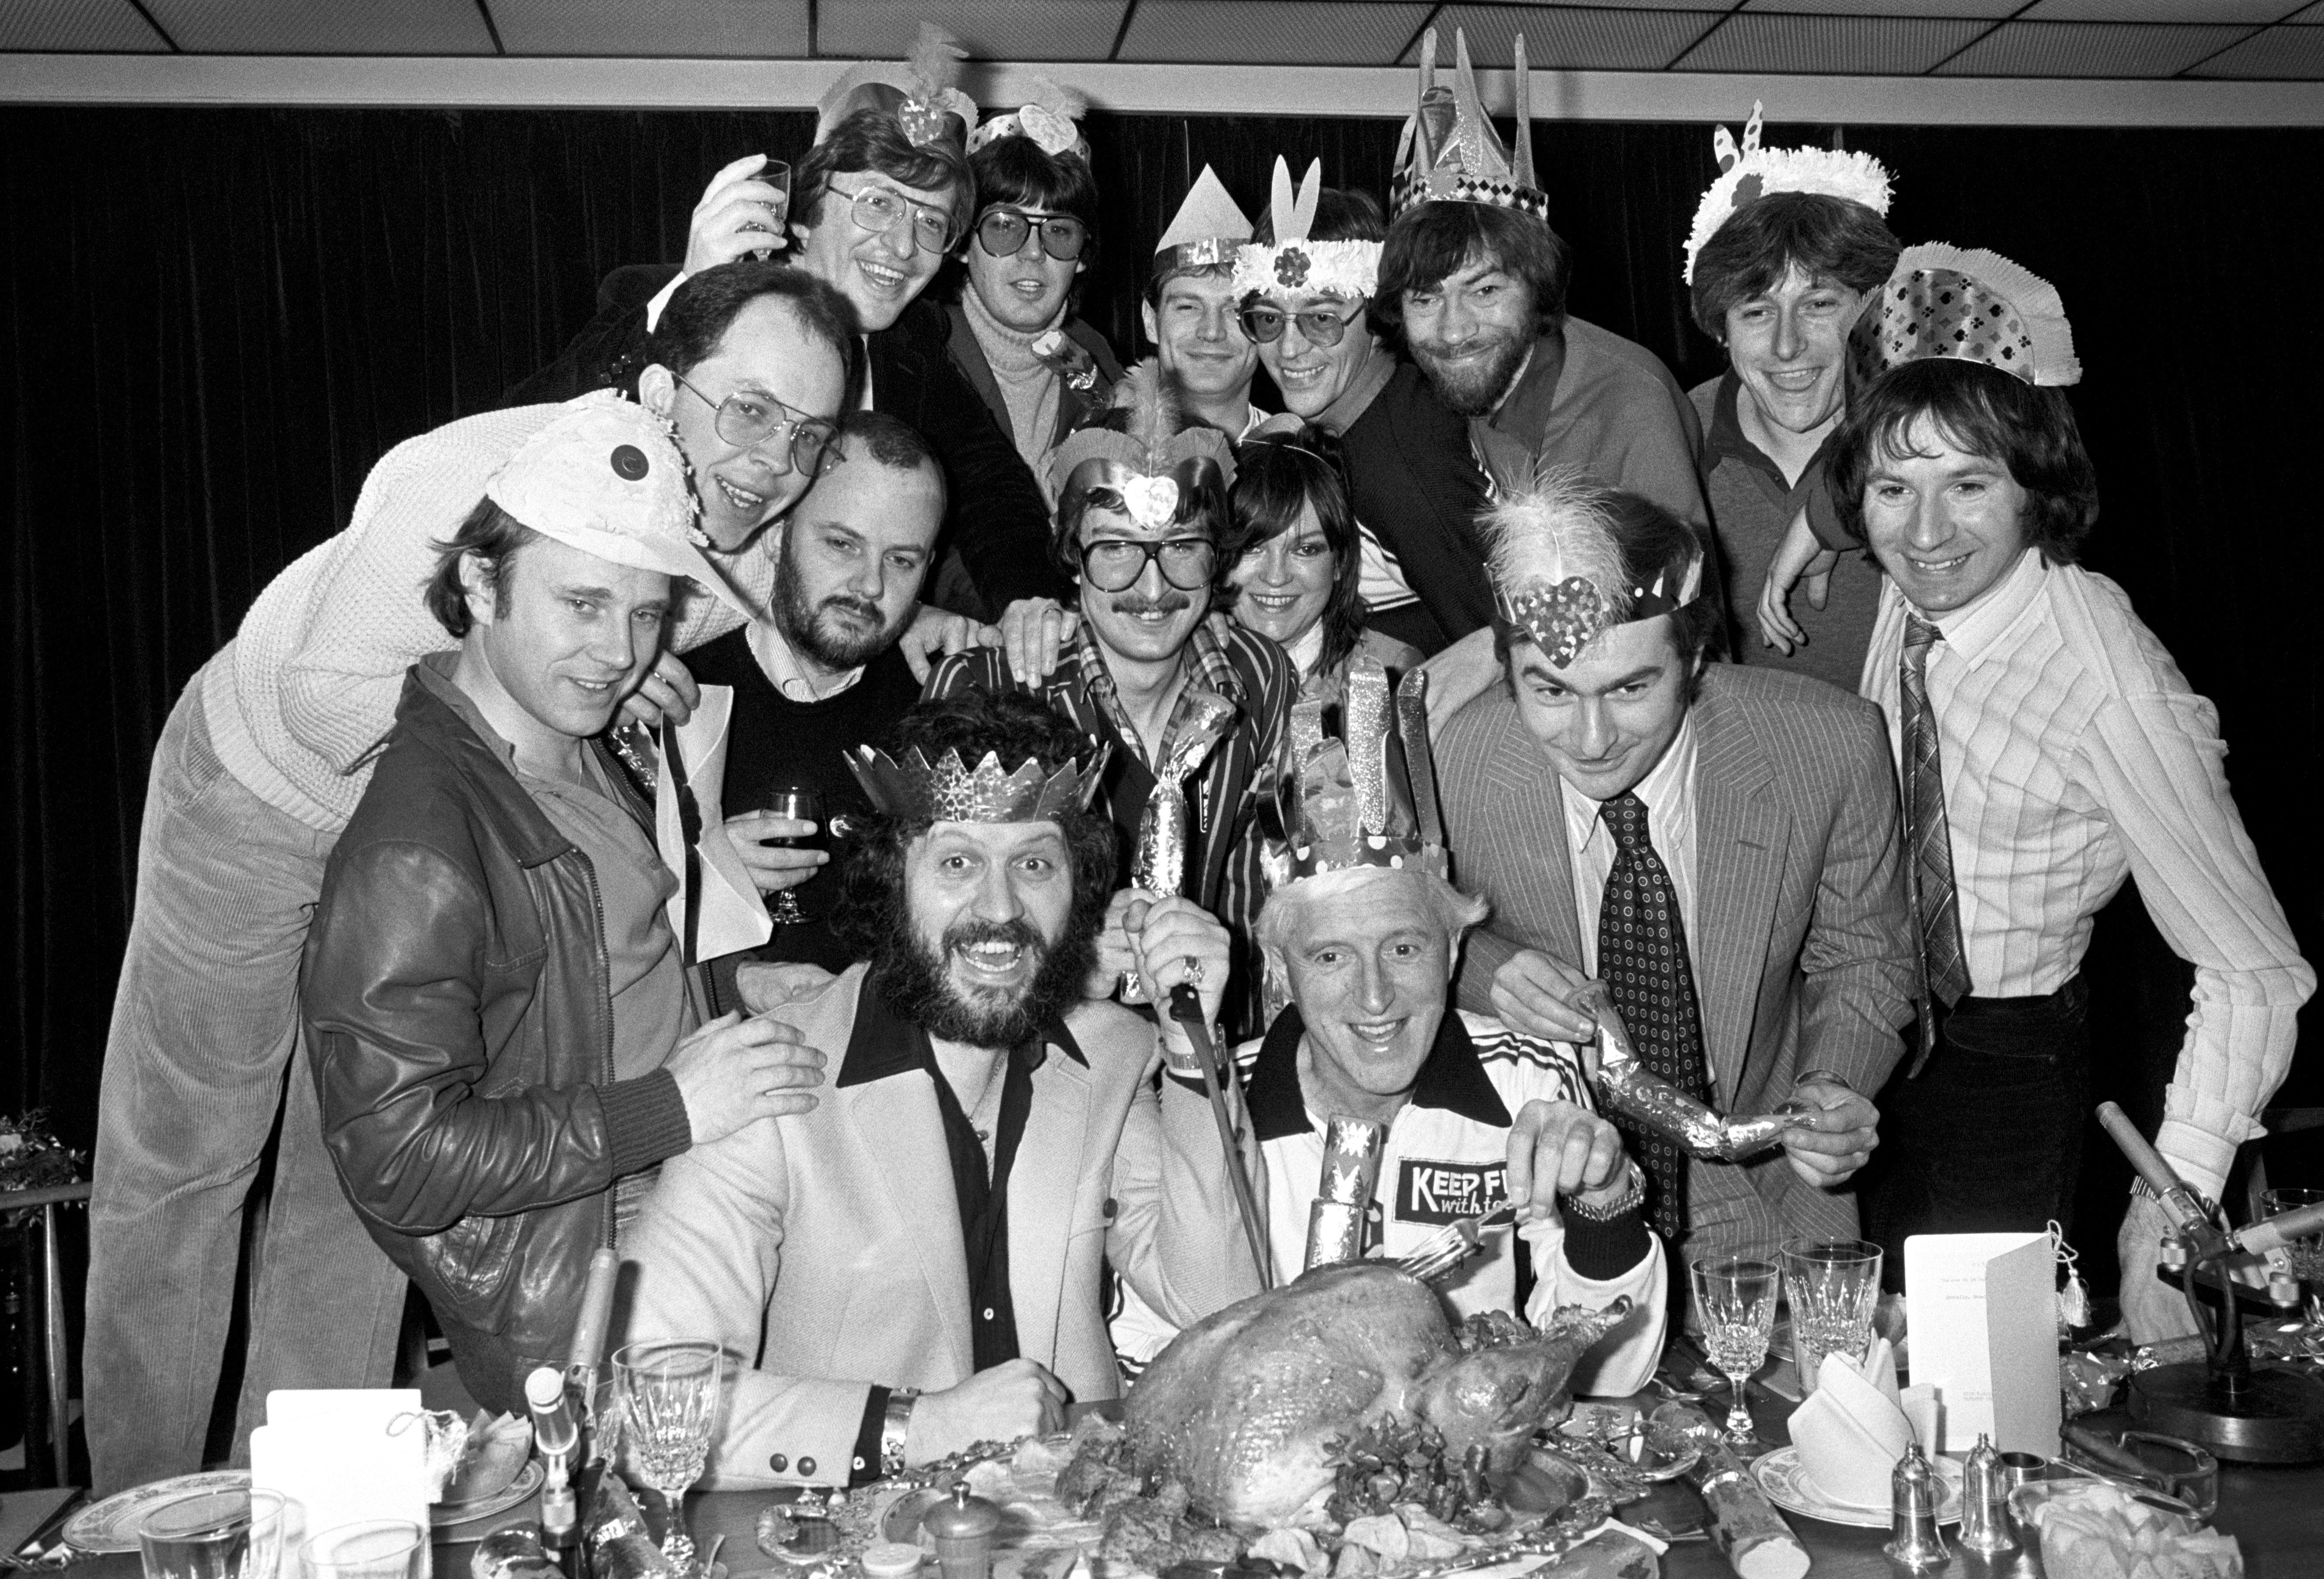 A group of fifteen of radio's best-known disc jockeys eating Christmas Lunch at Broadcasting House in 1980. Back L/R Simon Bates, Mike Read, Peter Powell, Tommy Vance, Adrian Love and Richard Skinner. Middle L/R Paul Burnett, Andy Peebles, John Peel, Steve Wright, Annie Nightingale, Paul Gambaccini, and Adrian Juste. Front L/R Dave Lee Travis and Jimmy Saville.